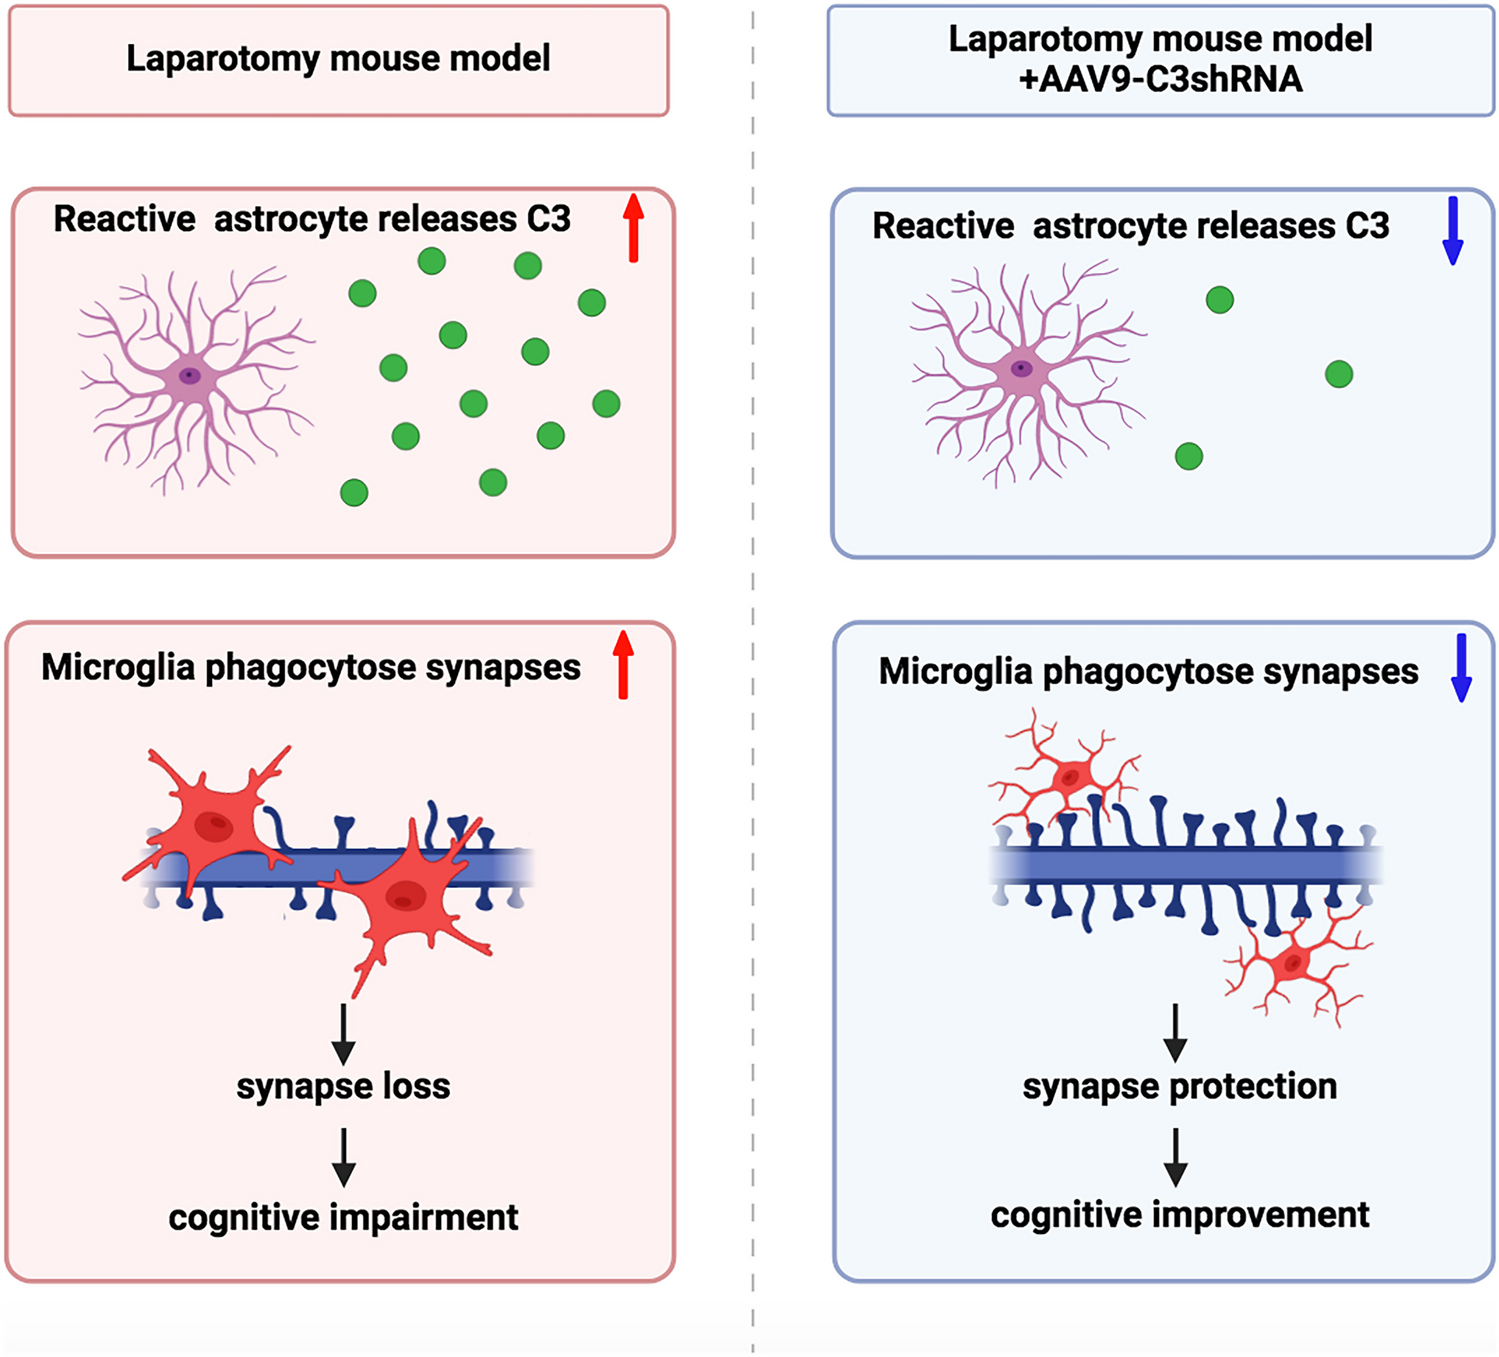 Complement C3 From Astrocytes Plays Significant Roles in Sustained Activation of Microglia and Cognitive Dysfunctions Triggered by Systemic Inflammation After Laparotomy in Adult Male Mice